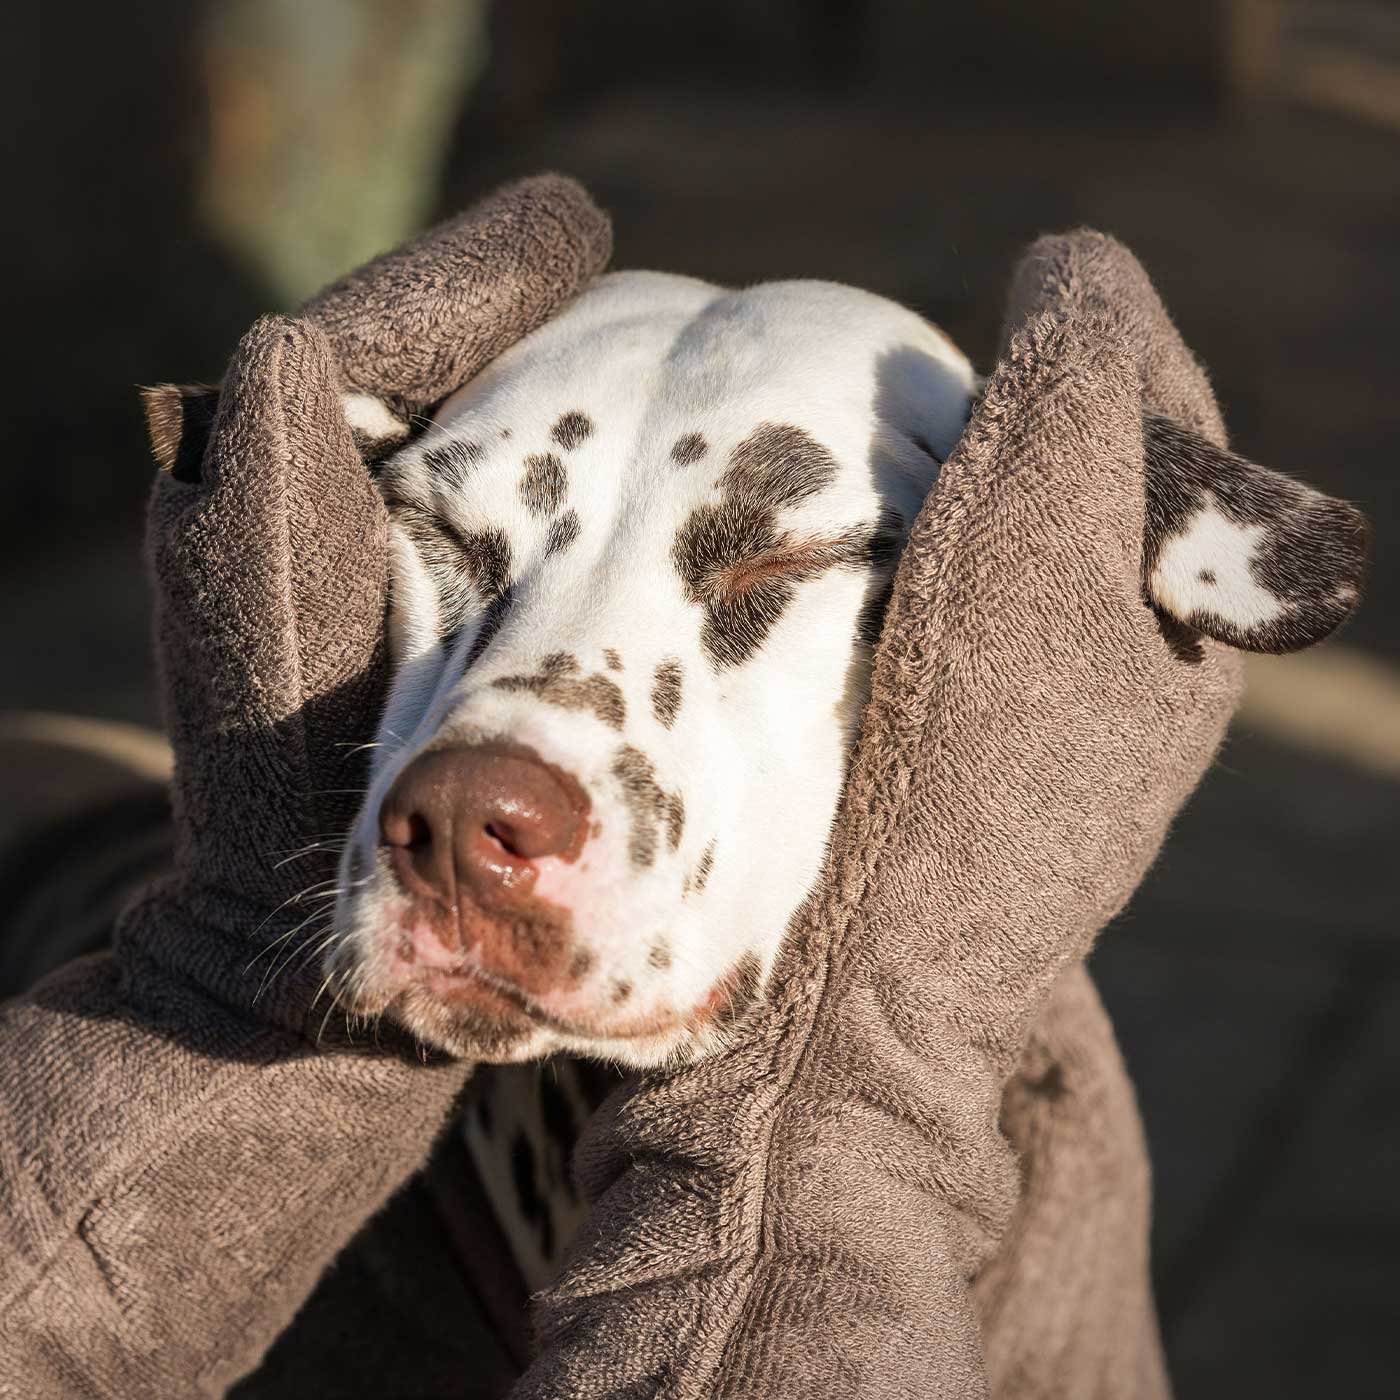 Introducing the ultimate bamboo dog drying mitts in beautiful Mole (Brown), made from luxurious bamboo to aid sensitive skin featuring universal size to fit all with super absorbent material for easy pet drying! The perfect dog drying gloves, available now at Lords & Labradors, In four colours!